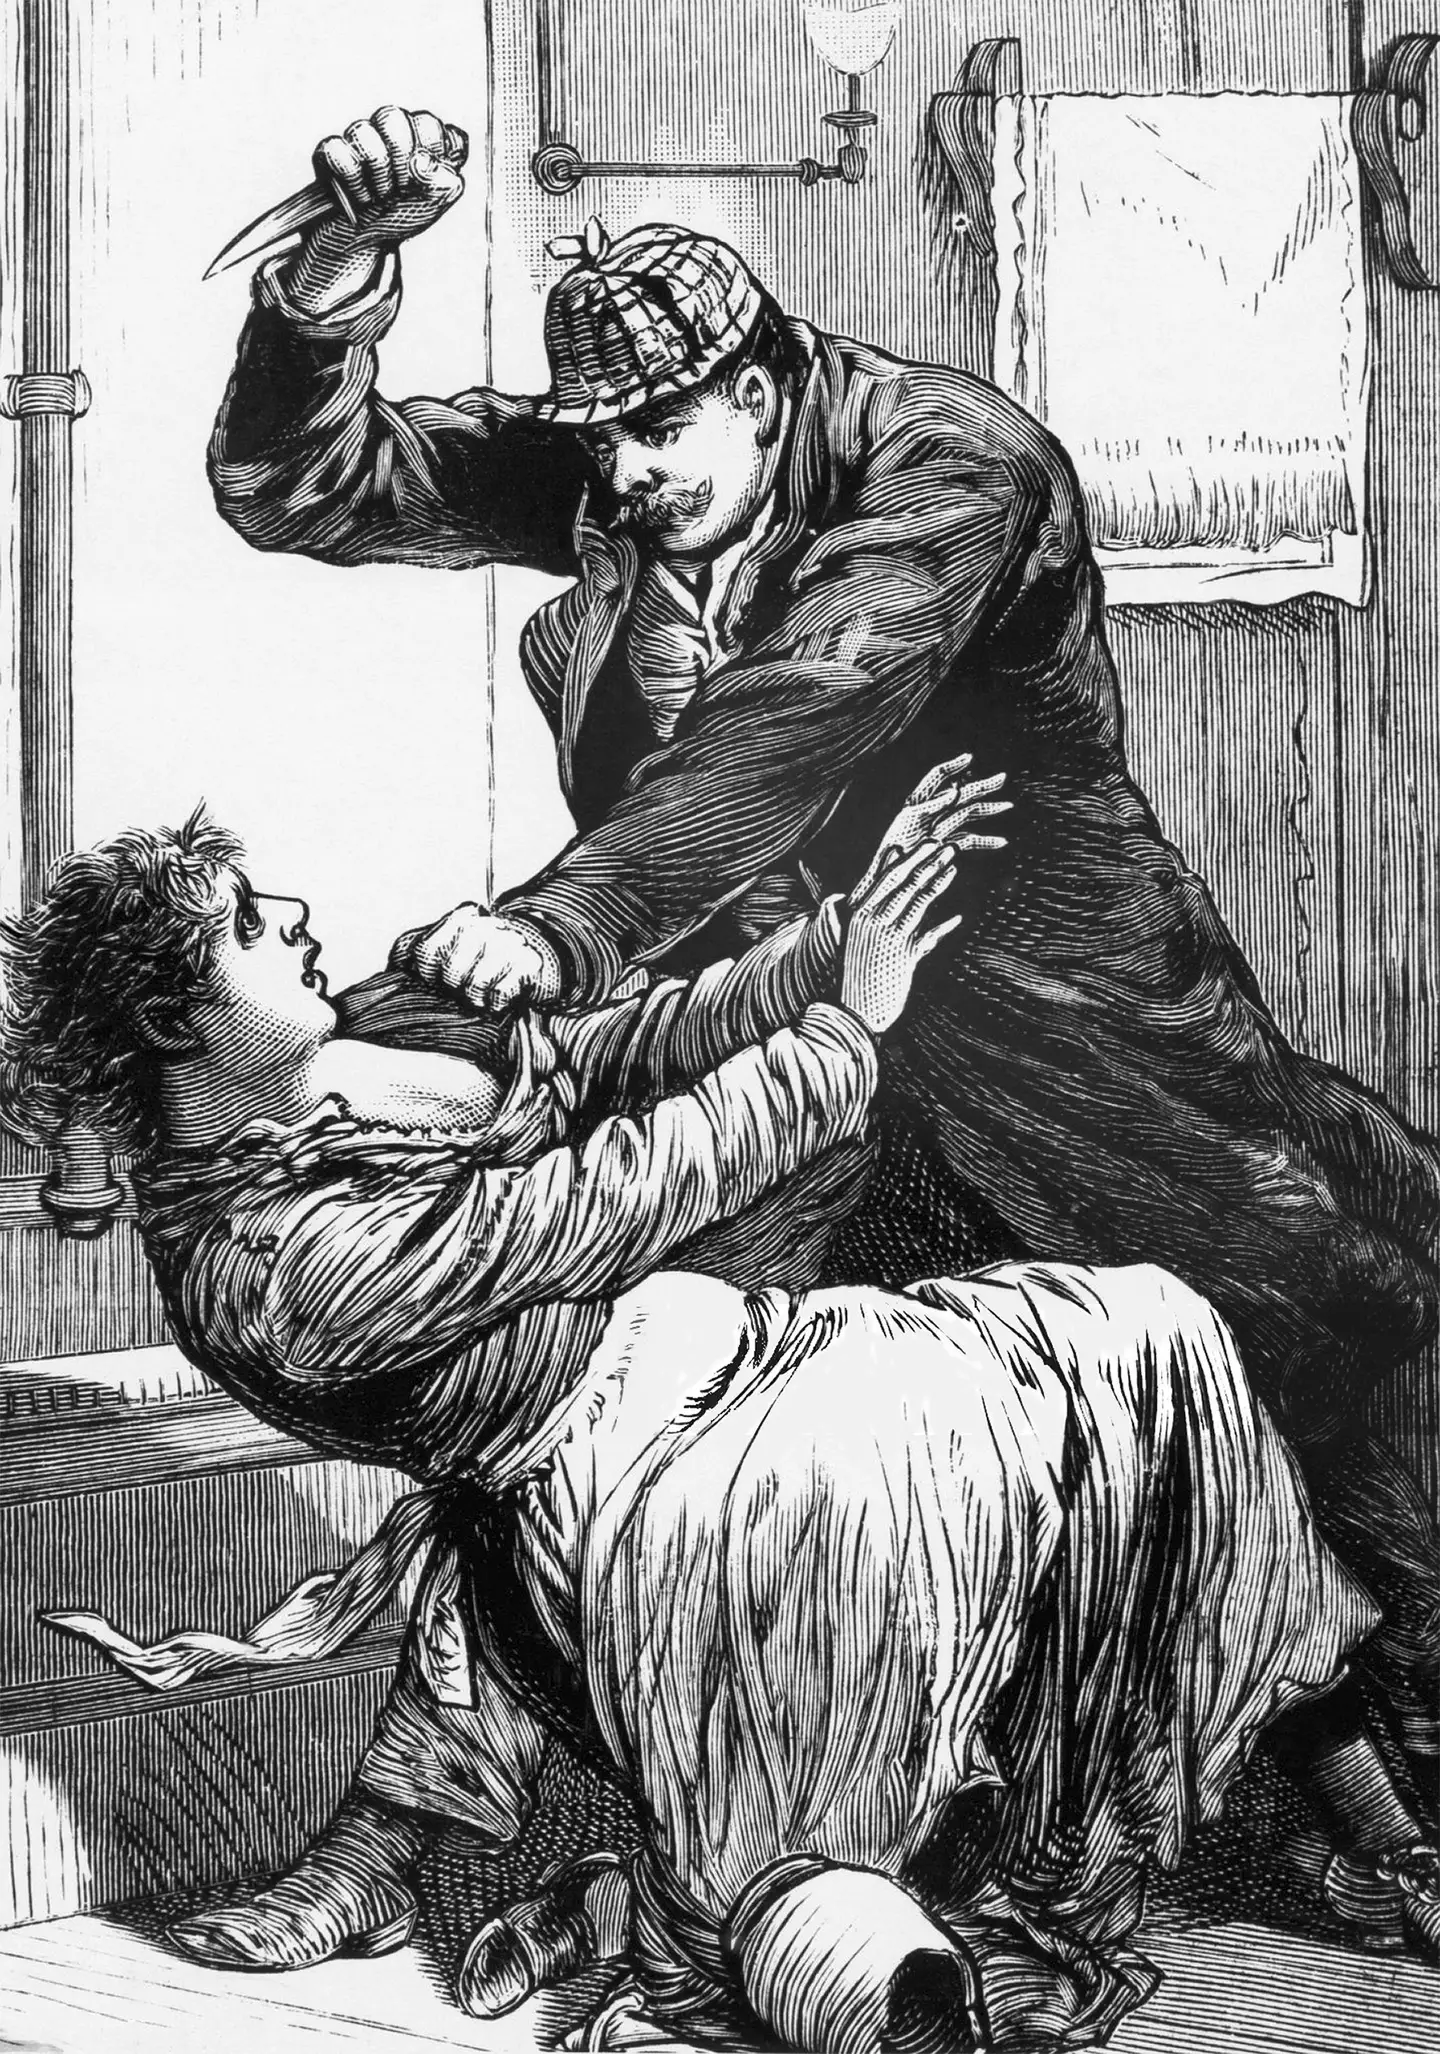 Illustration from the National Police Gazette in February 1889 titled 'Another Victim of Jack the Ripper'.